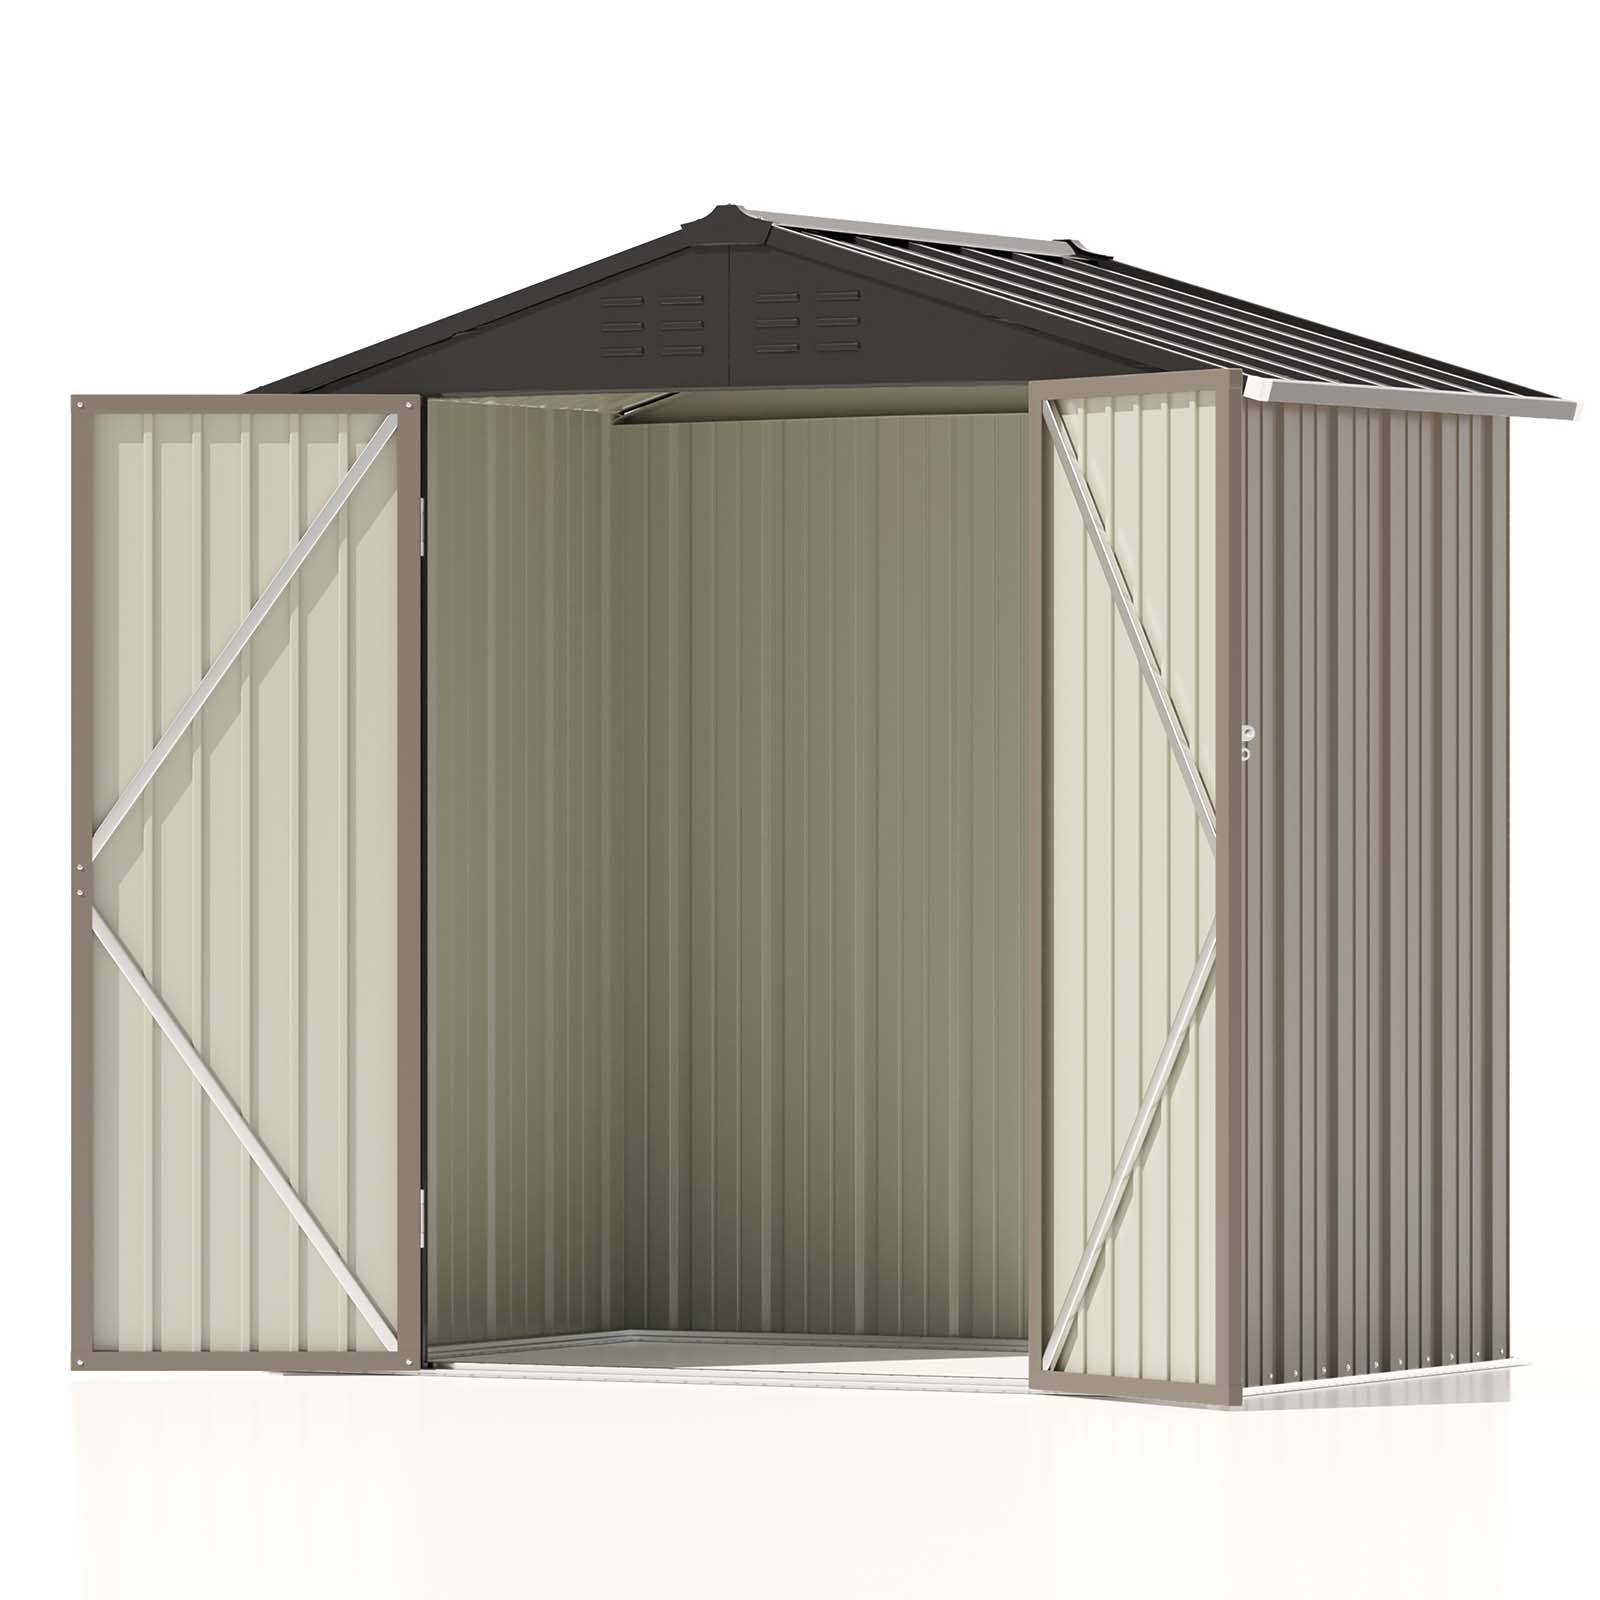 Patiowell 6x4 Metal Shed With Peak Roof-2